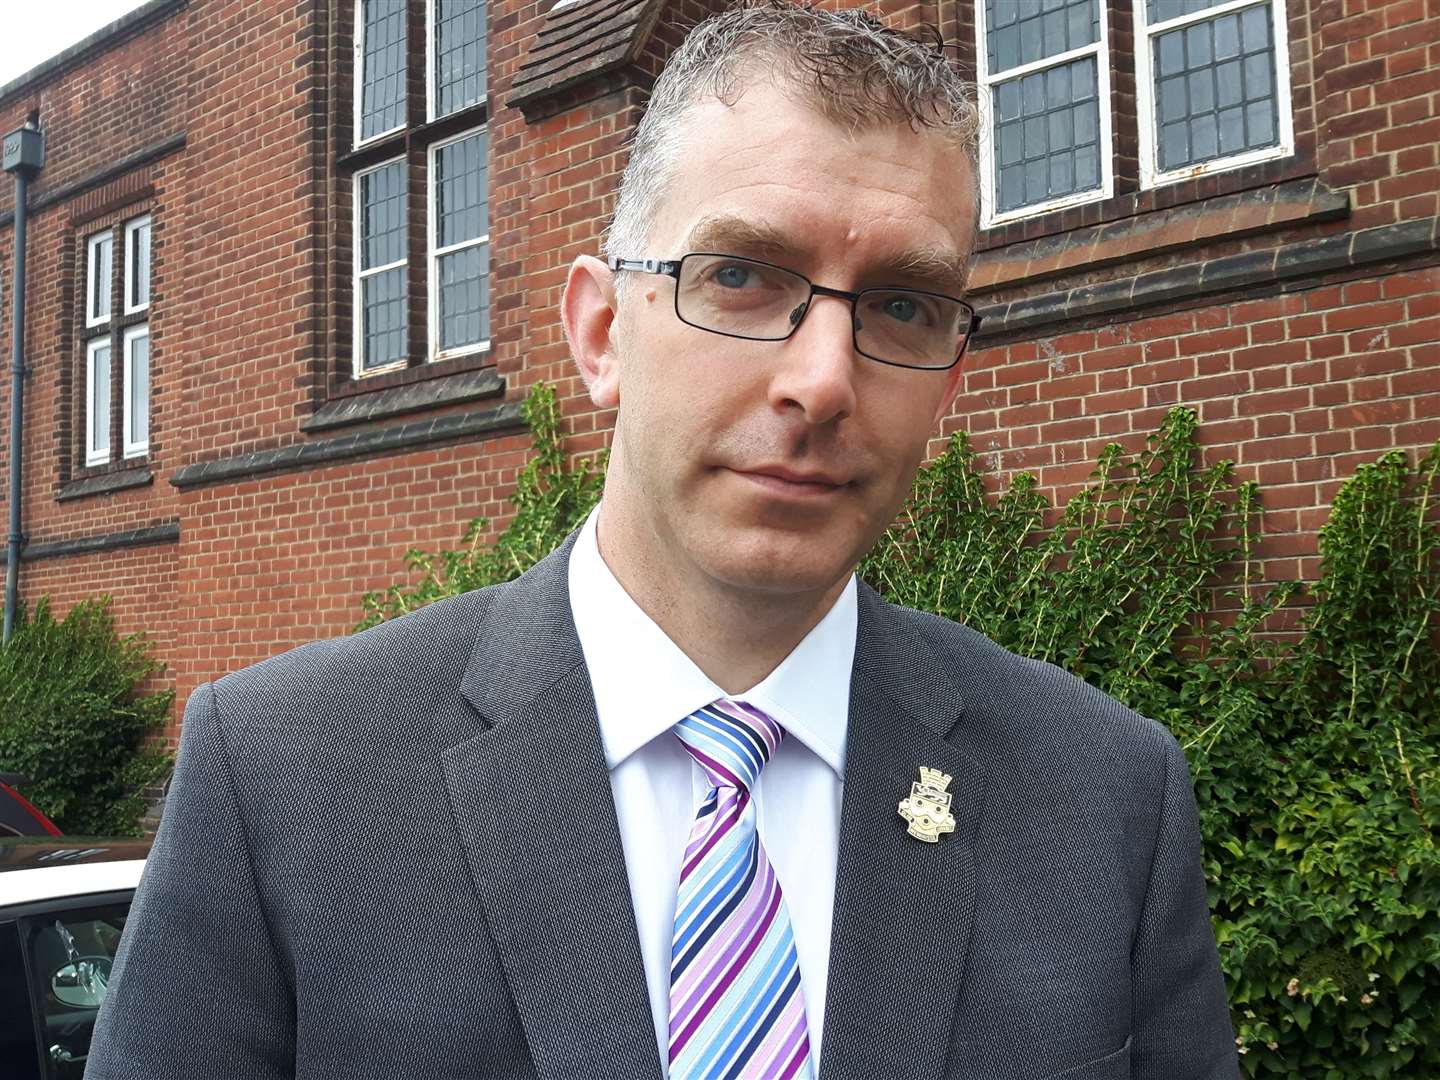 Maidstone Grammar School head teacher Mark Tomkins said the ordeal has been "distressing" after police cleared him of any wrongdoing